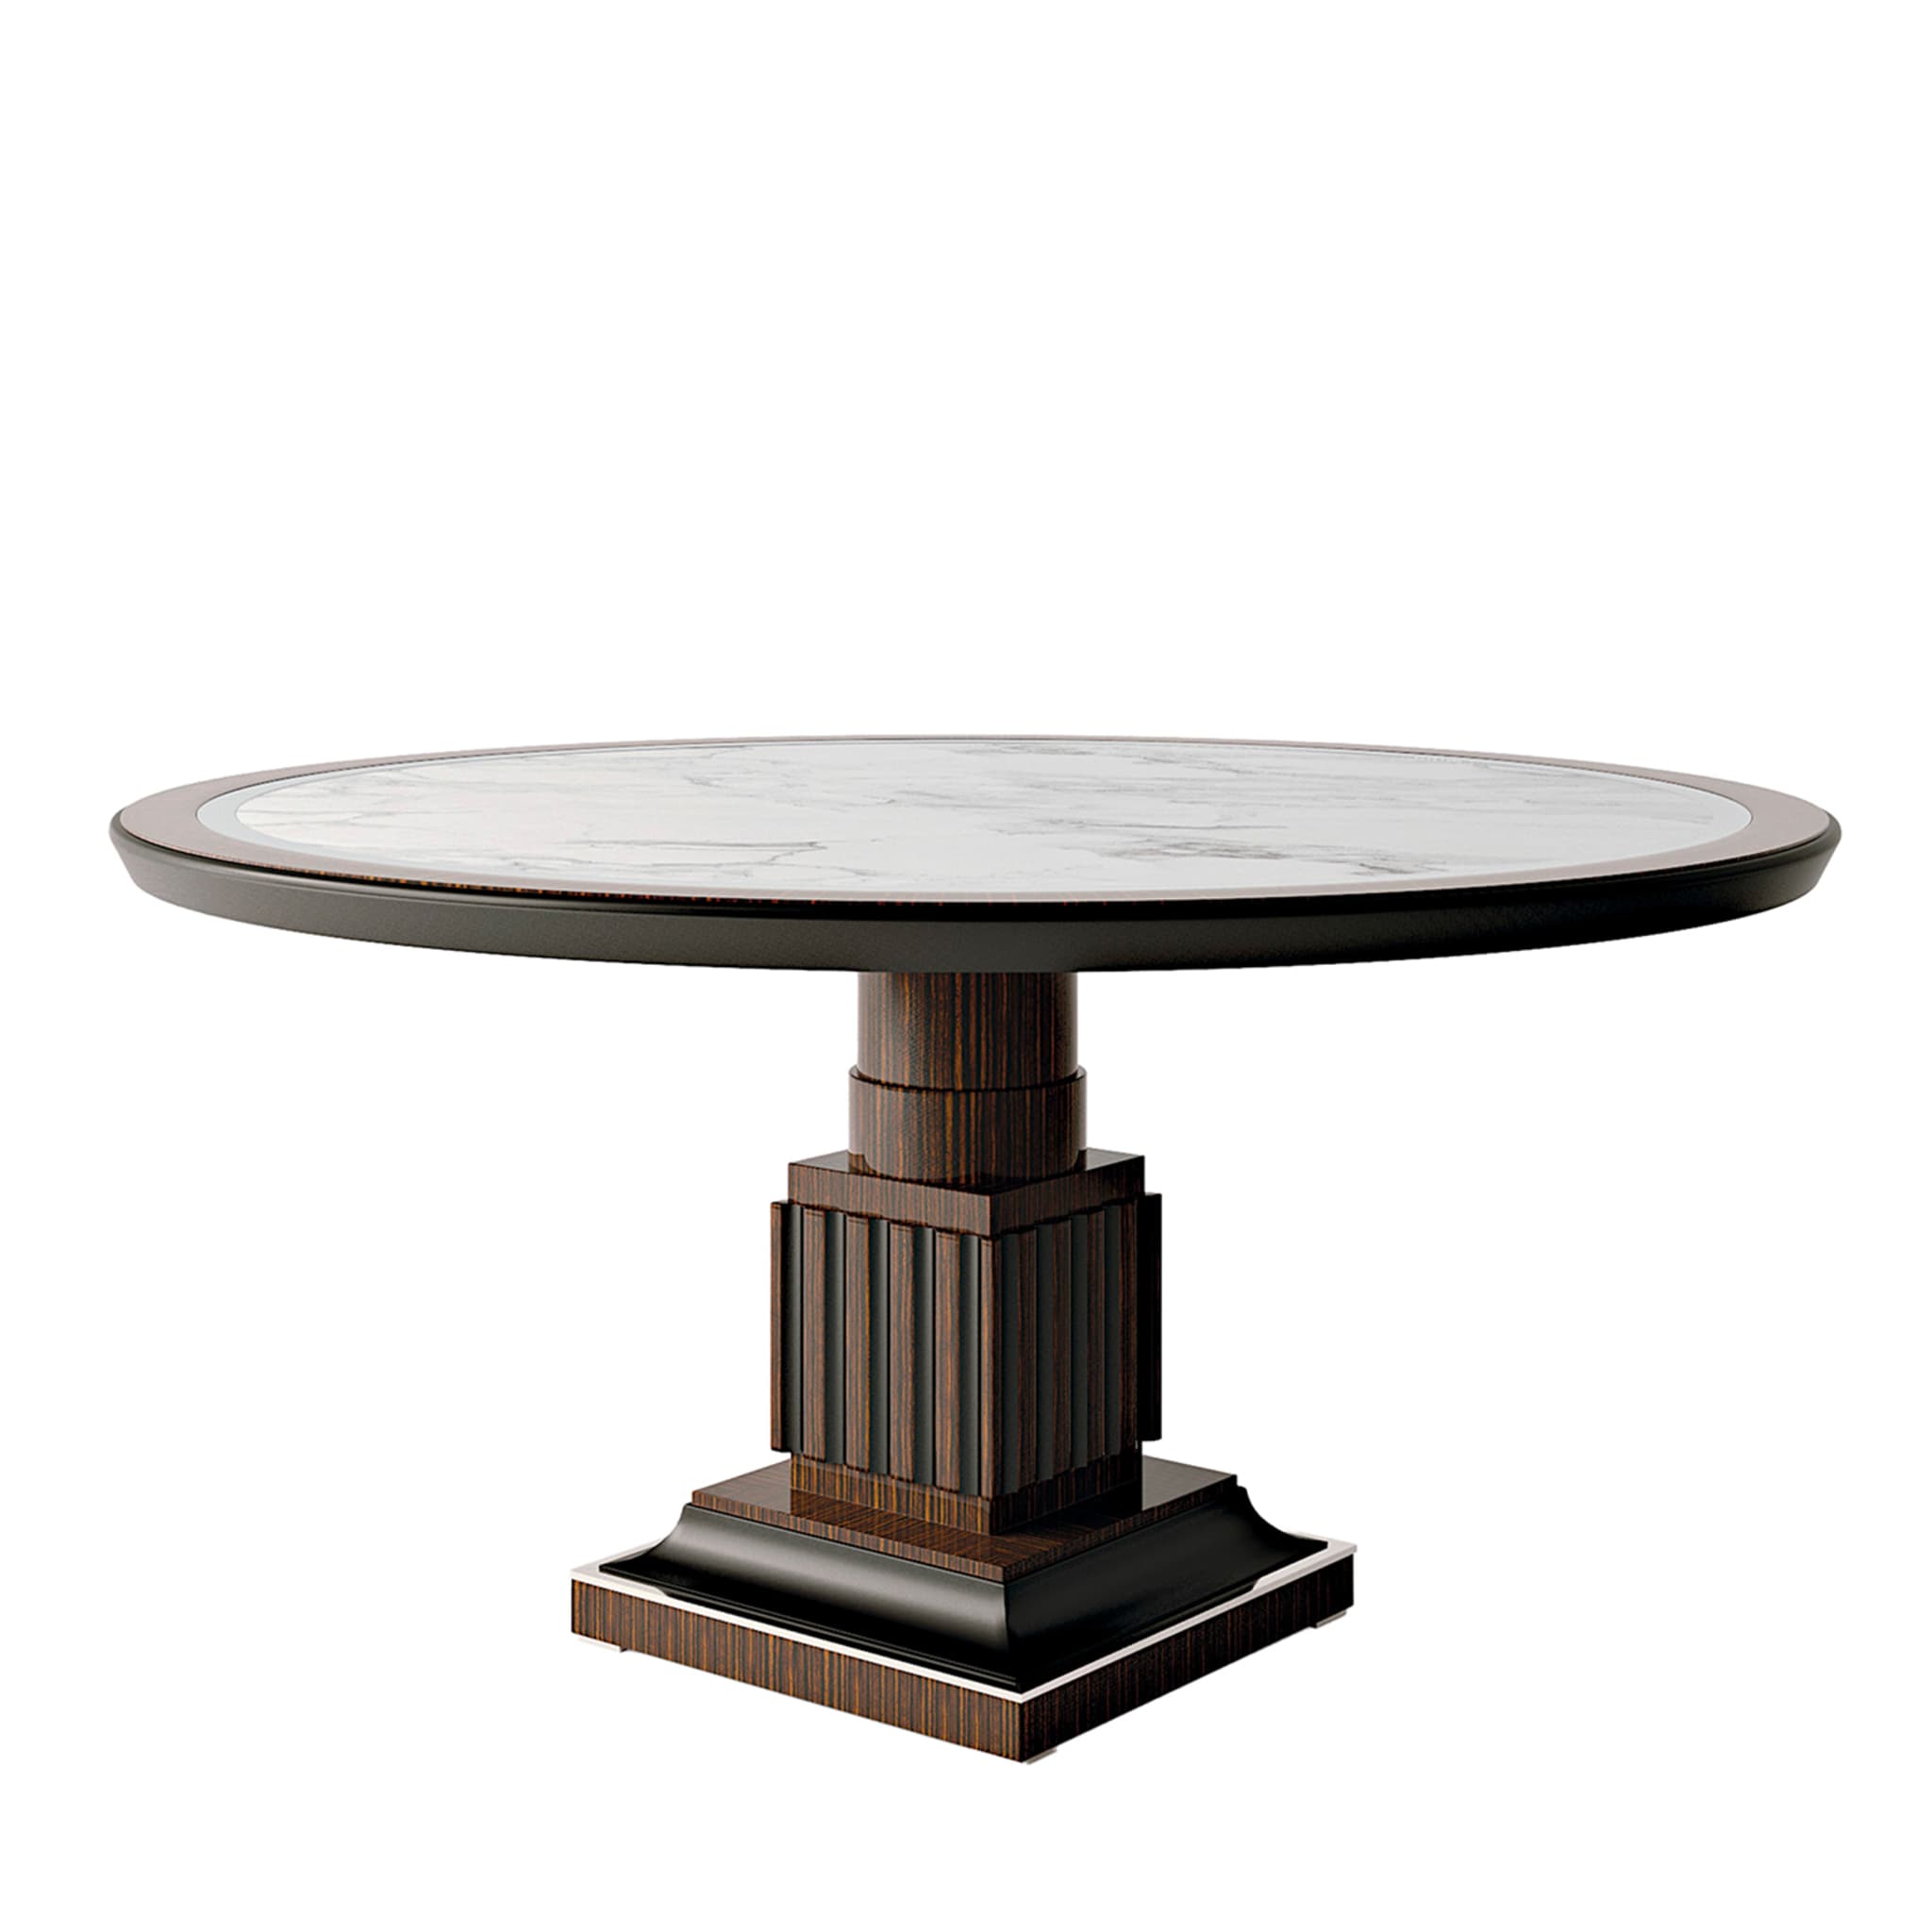 Ebony and Marble Round Table - Main view